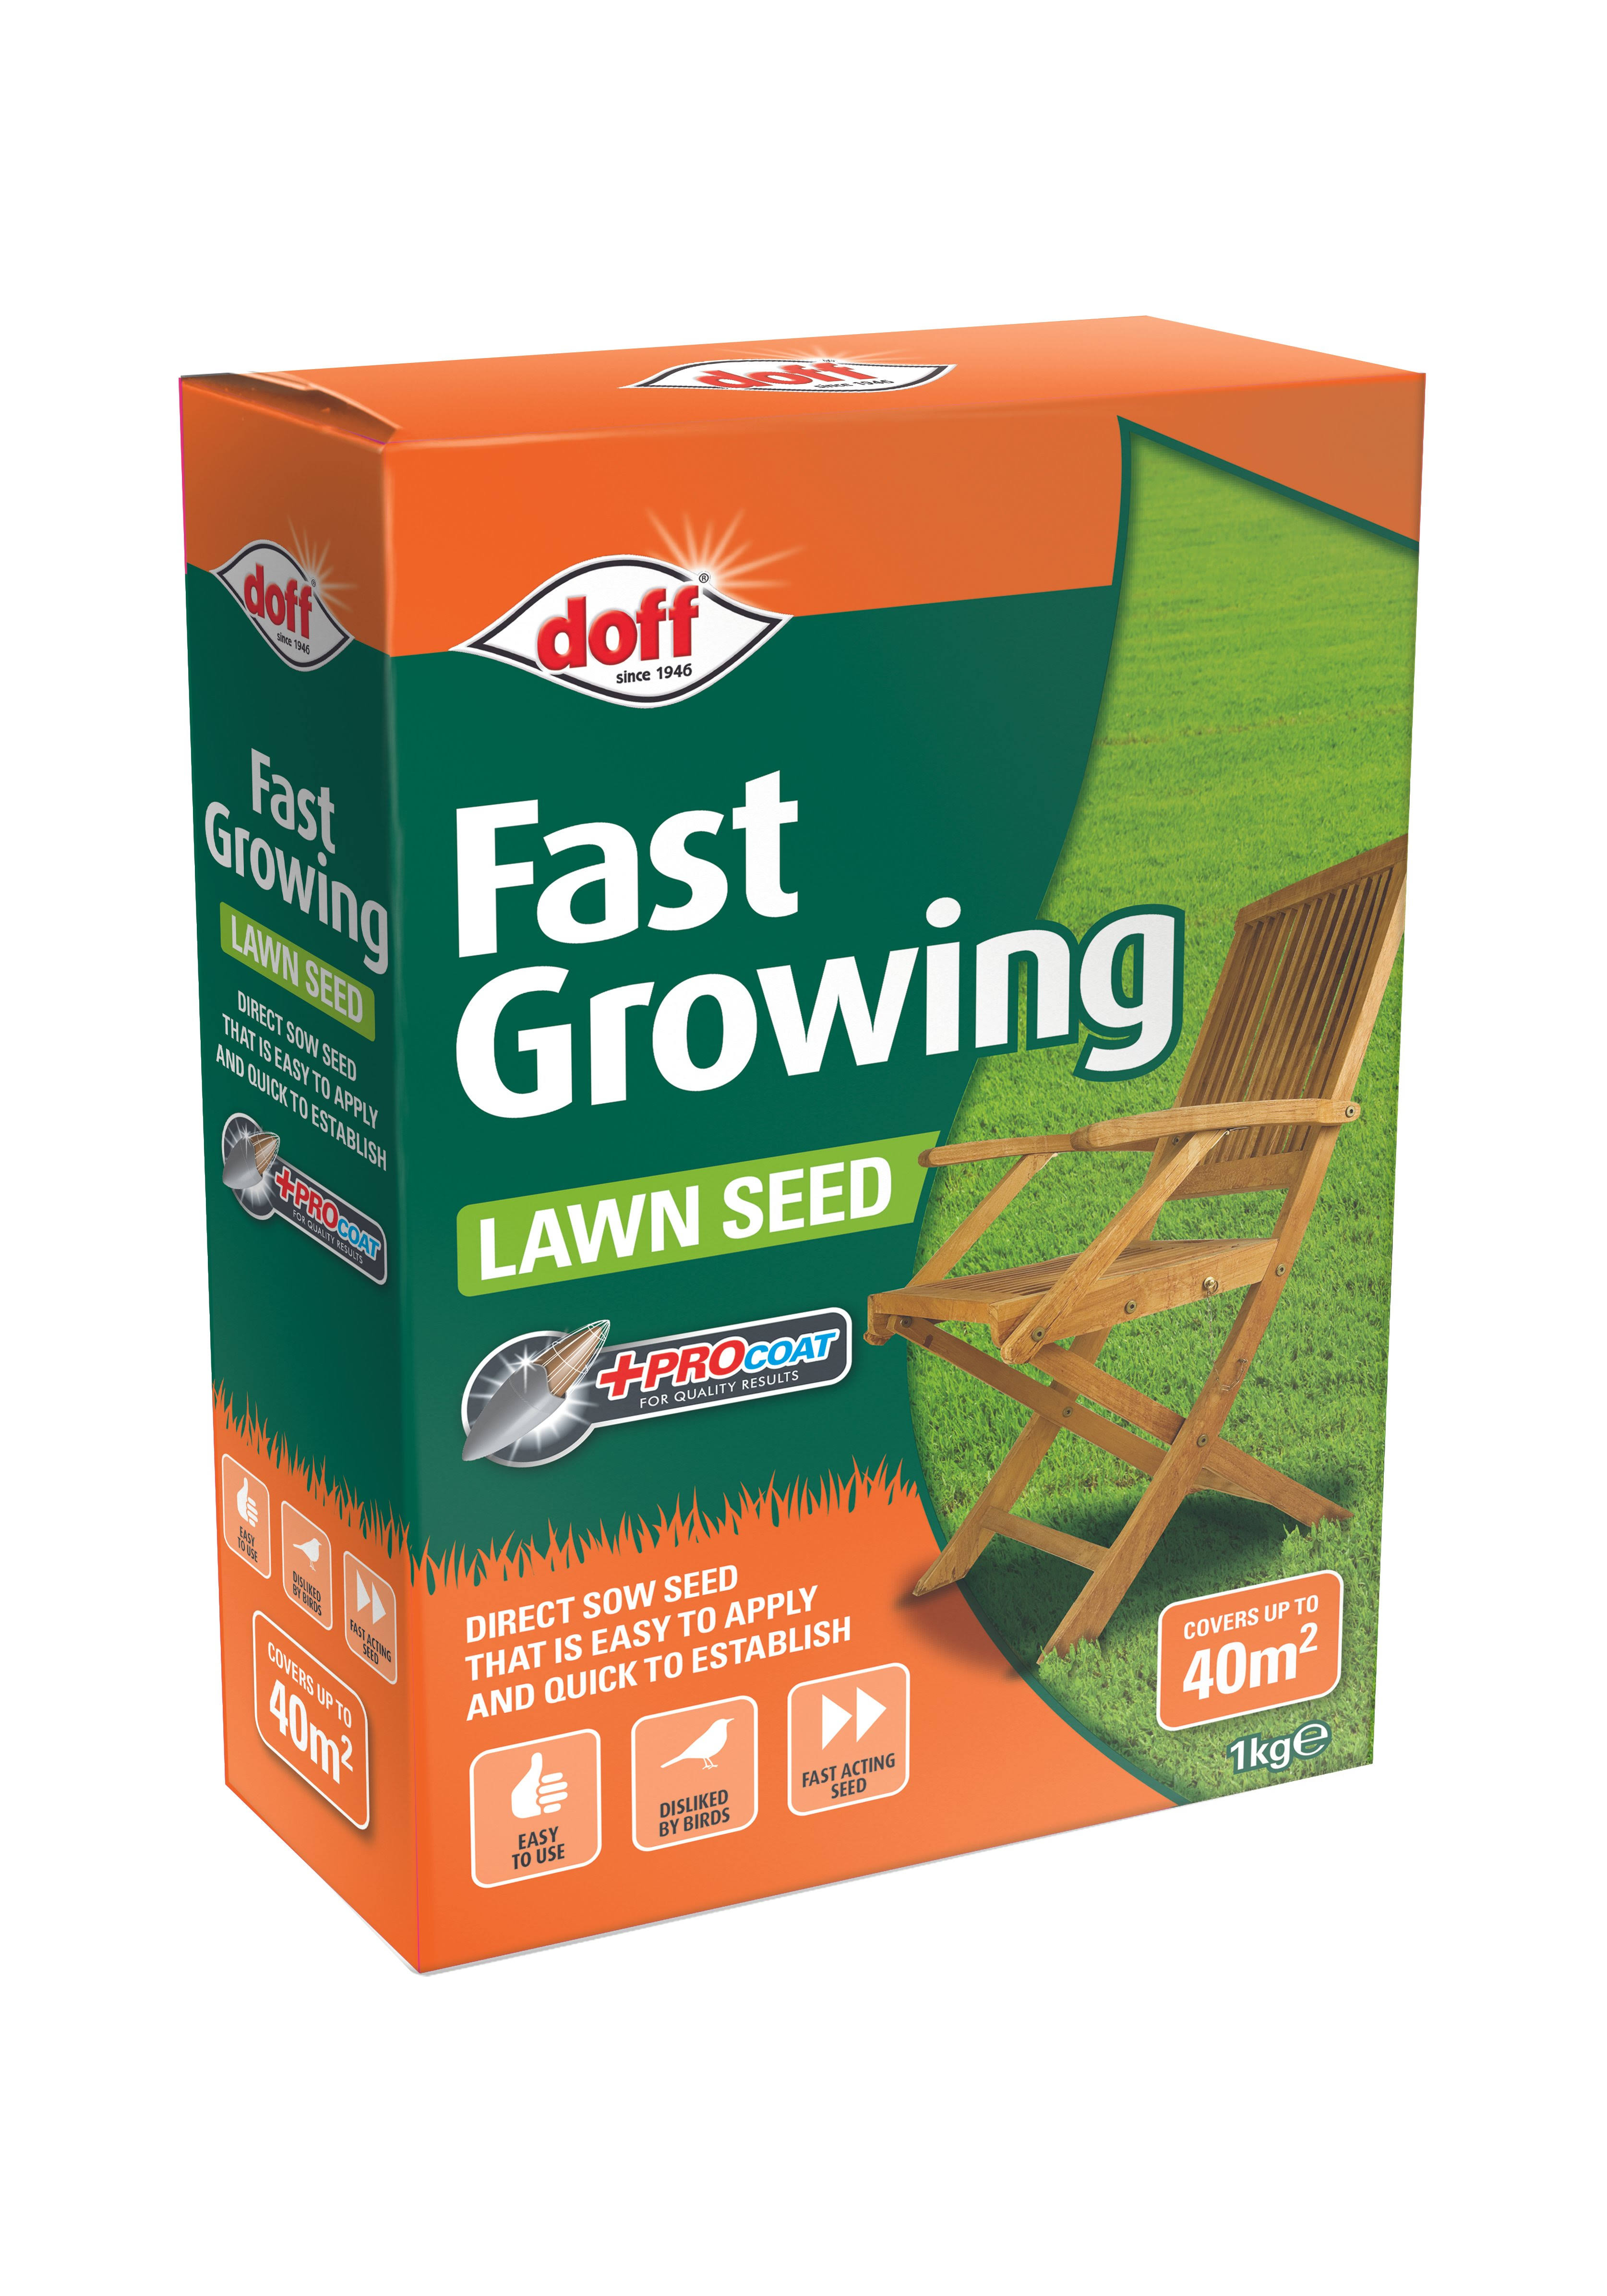 Doff Fast Acting Lawn Seed - with Procoat, 1kg